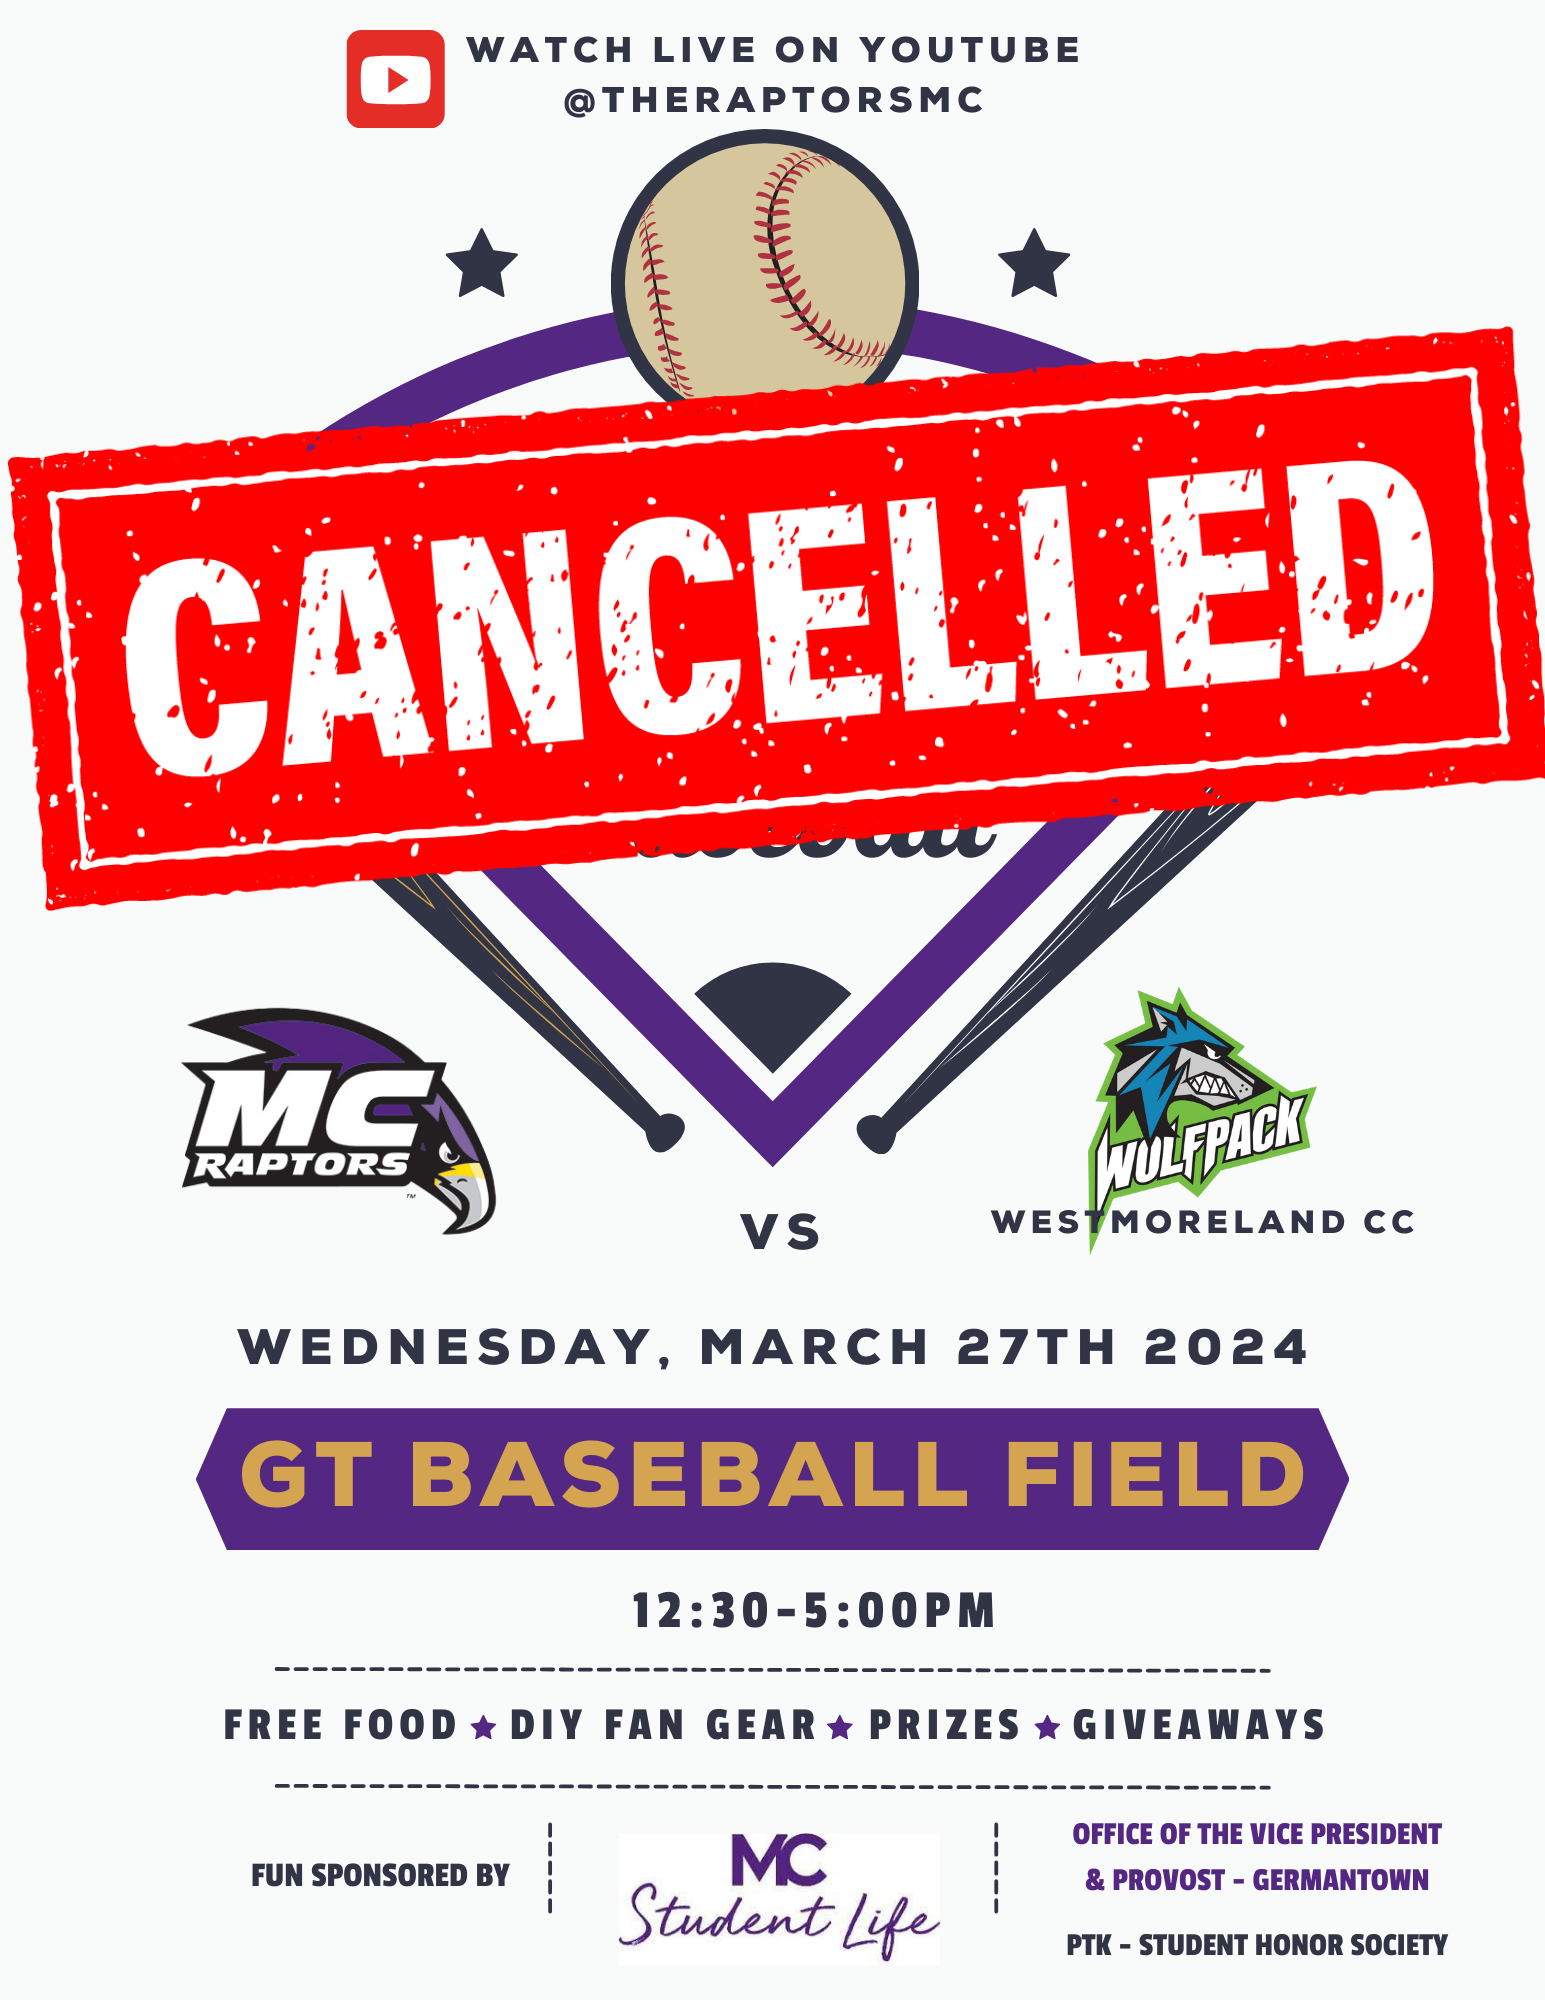 CANCELLED: Fun At The Park With Raptors Baseball - March 27th